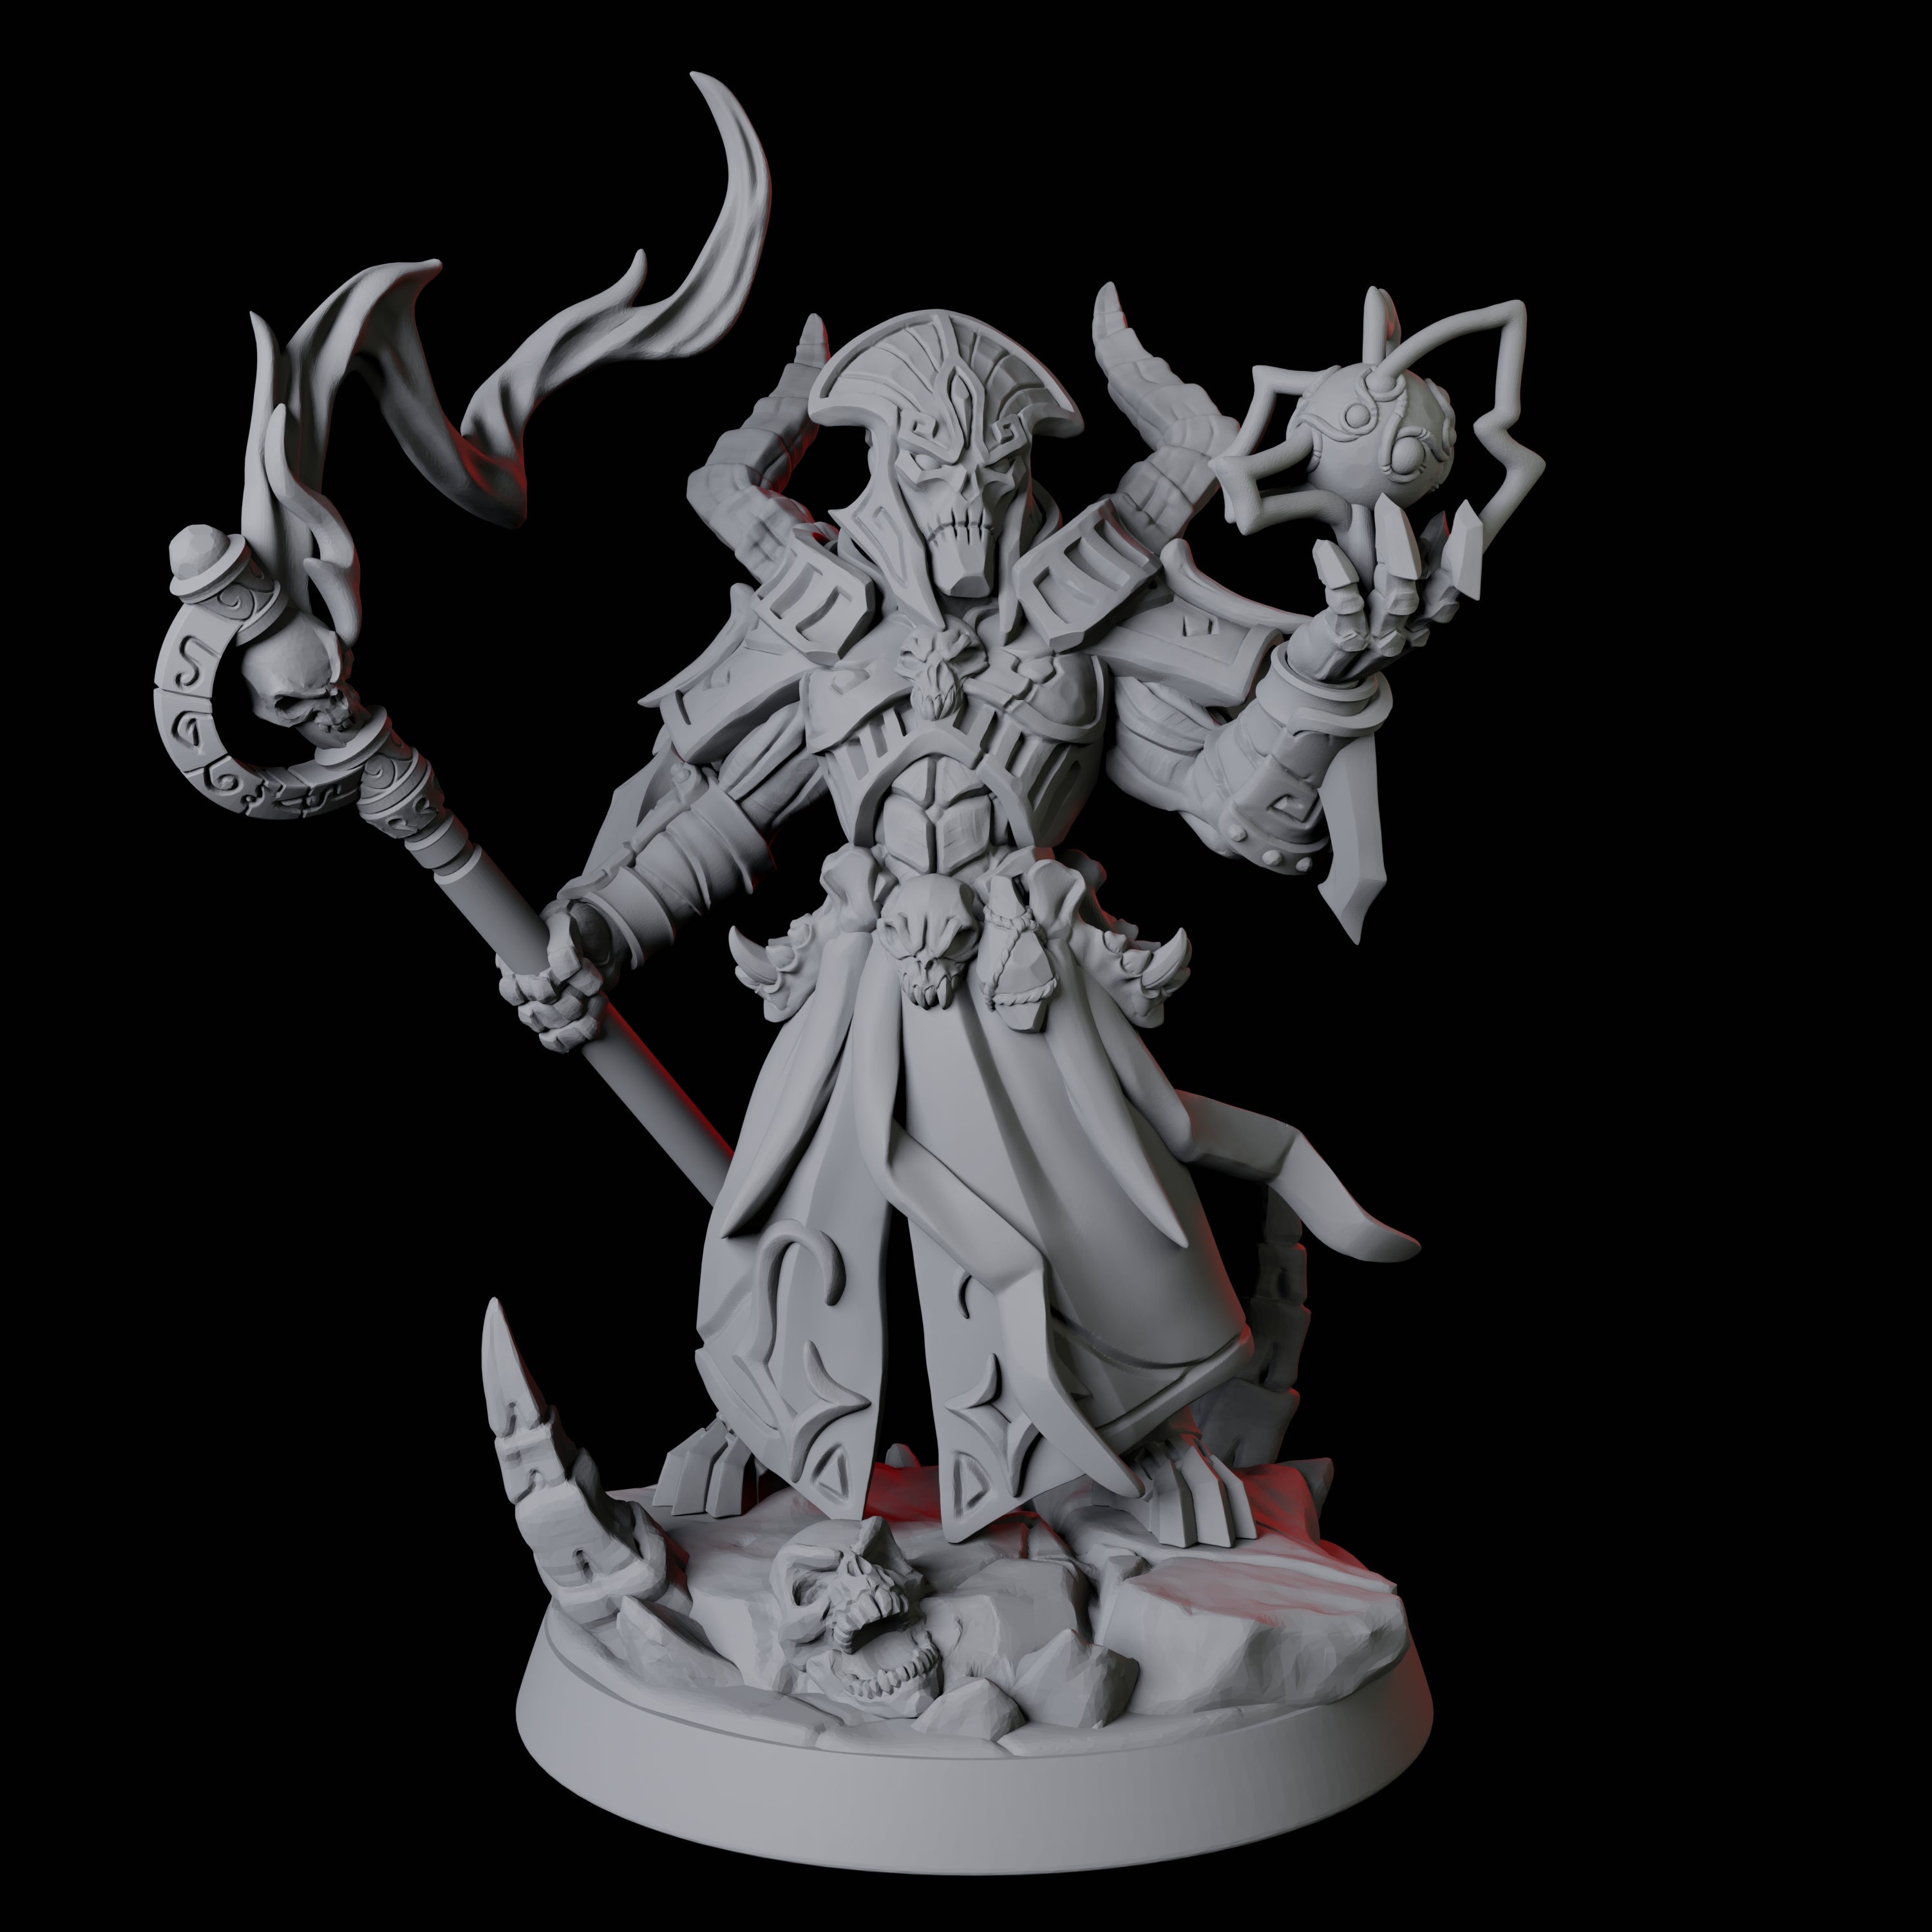 Powerful Warforged Warlock Miniature for Dungeons and Dragons, Pathfinder or other TTRPGs